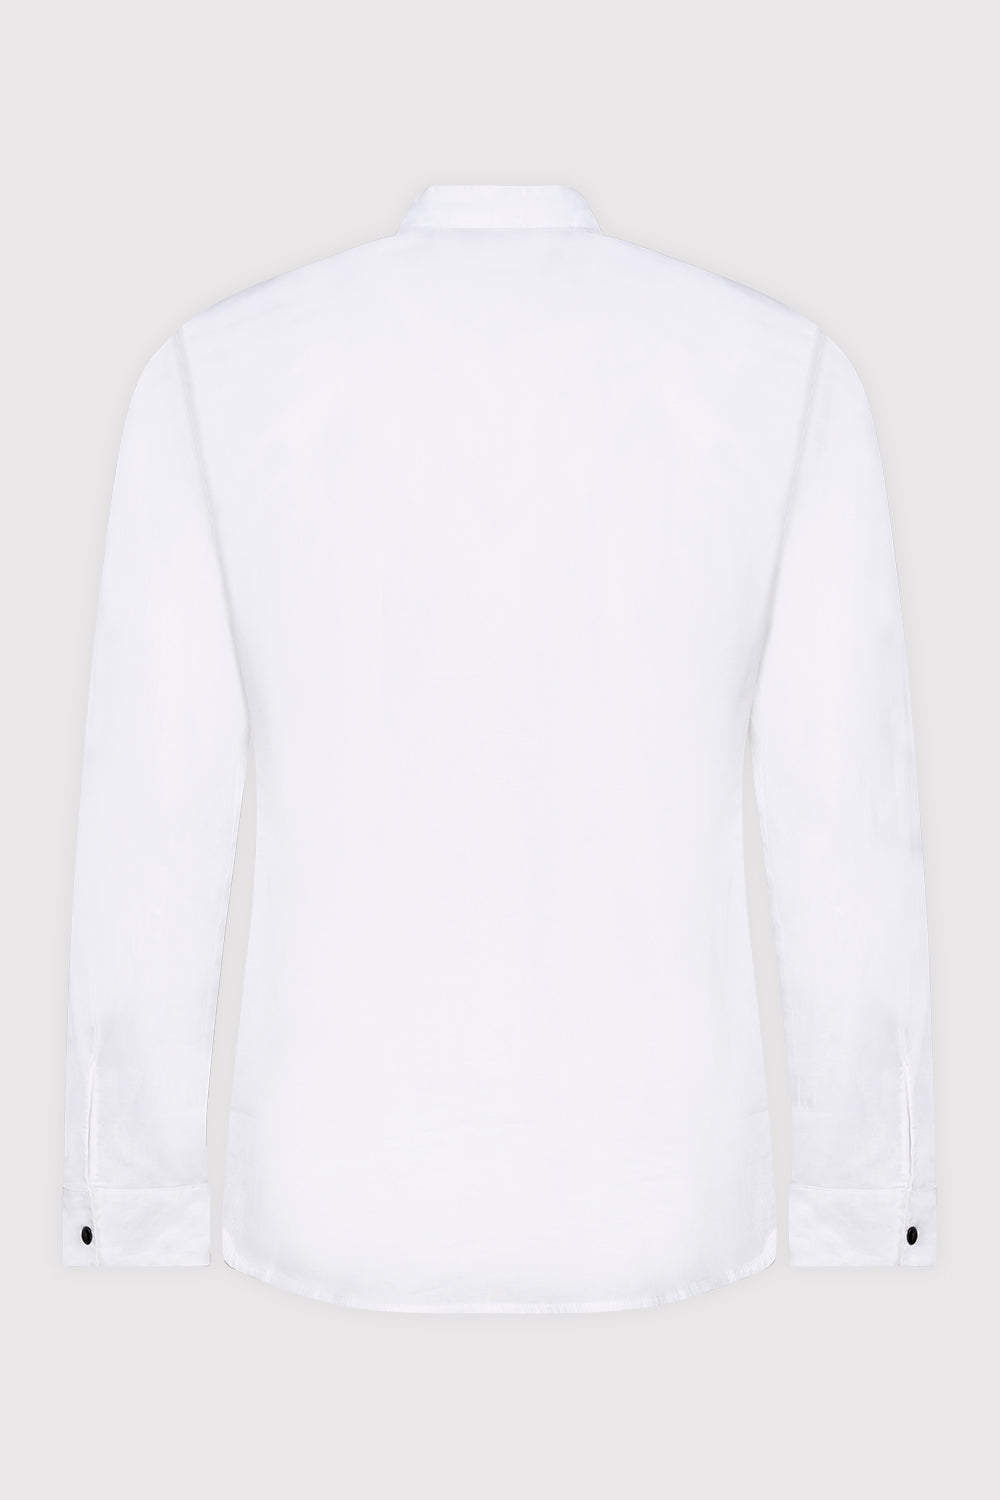 Zaher Long Sleeve Stand Up Button-Up Embroidered Men's Shirt in White